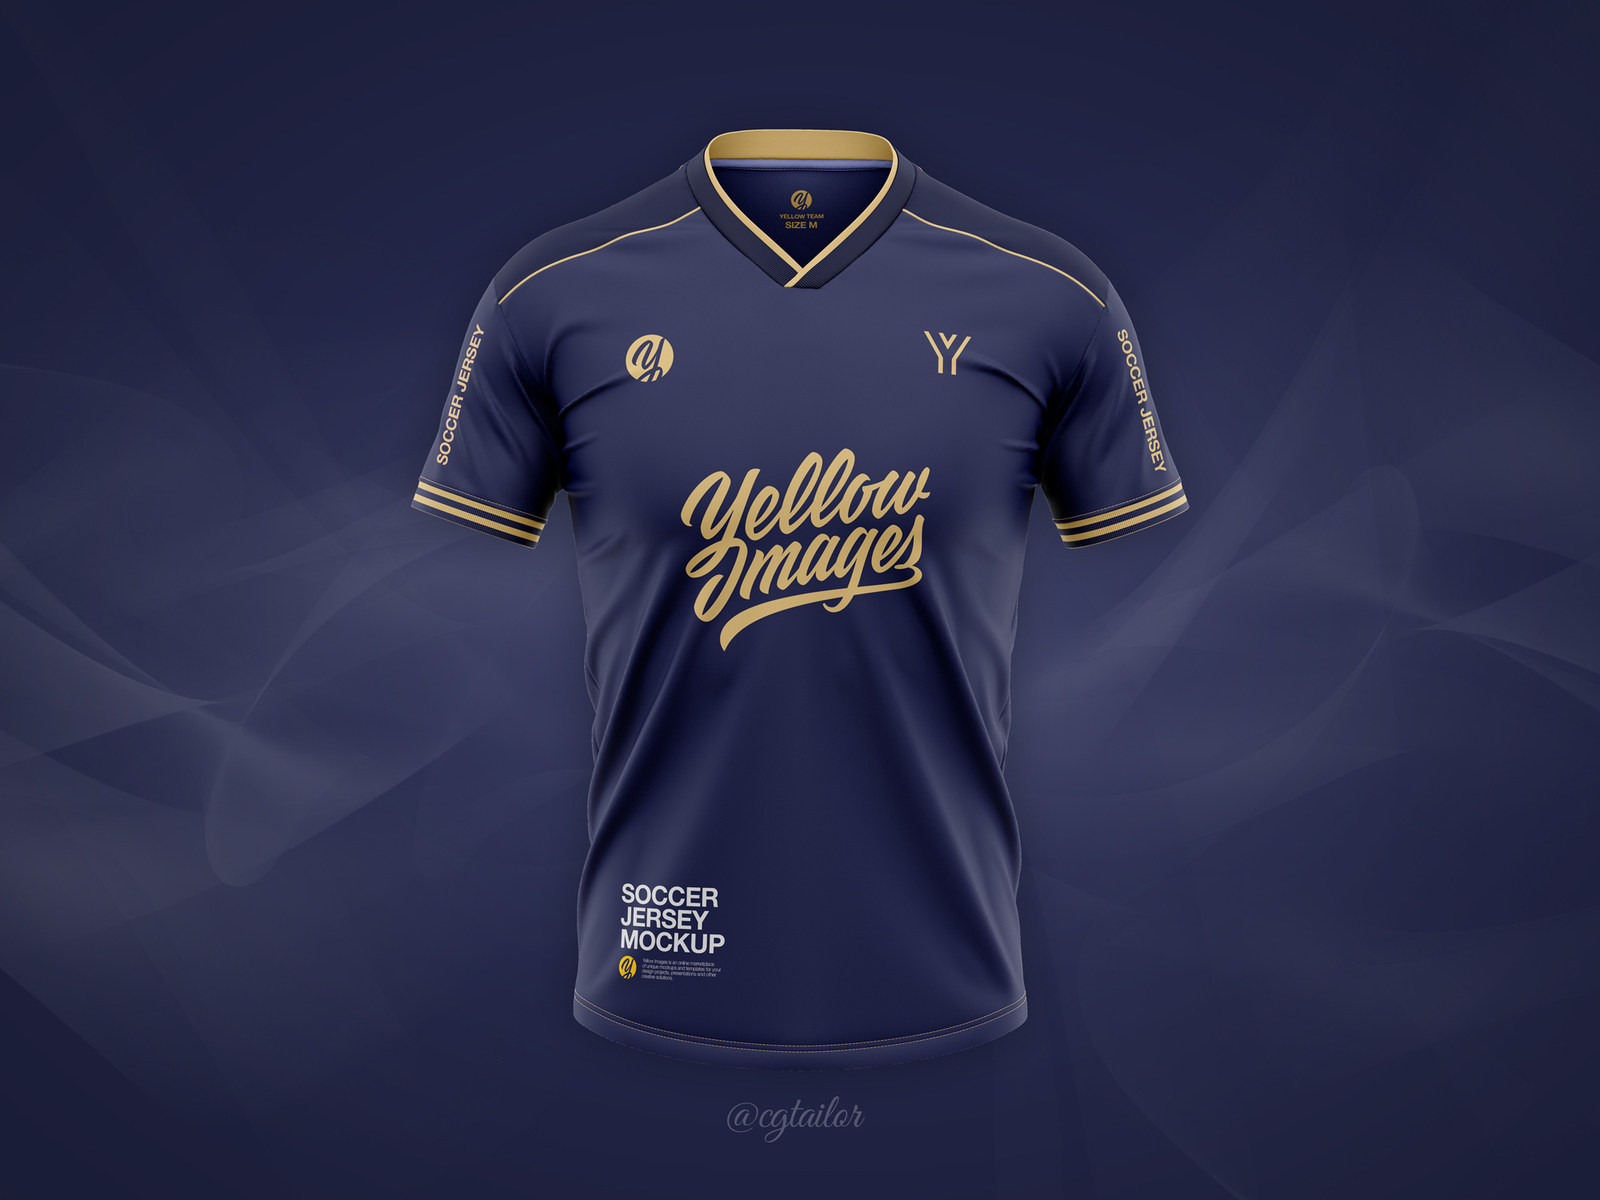 Men's Soccer Jersey by CG Tailor on Dribbble